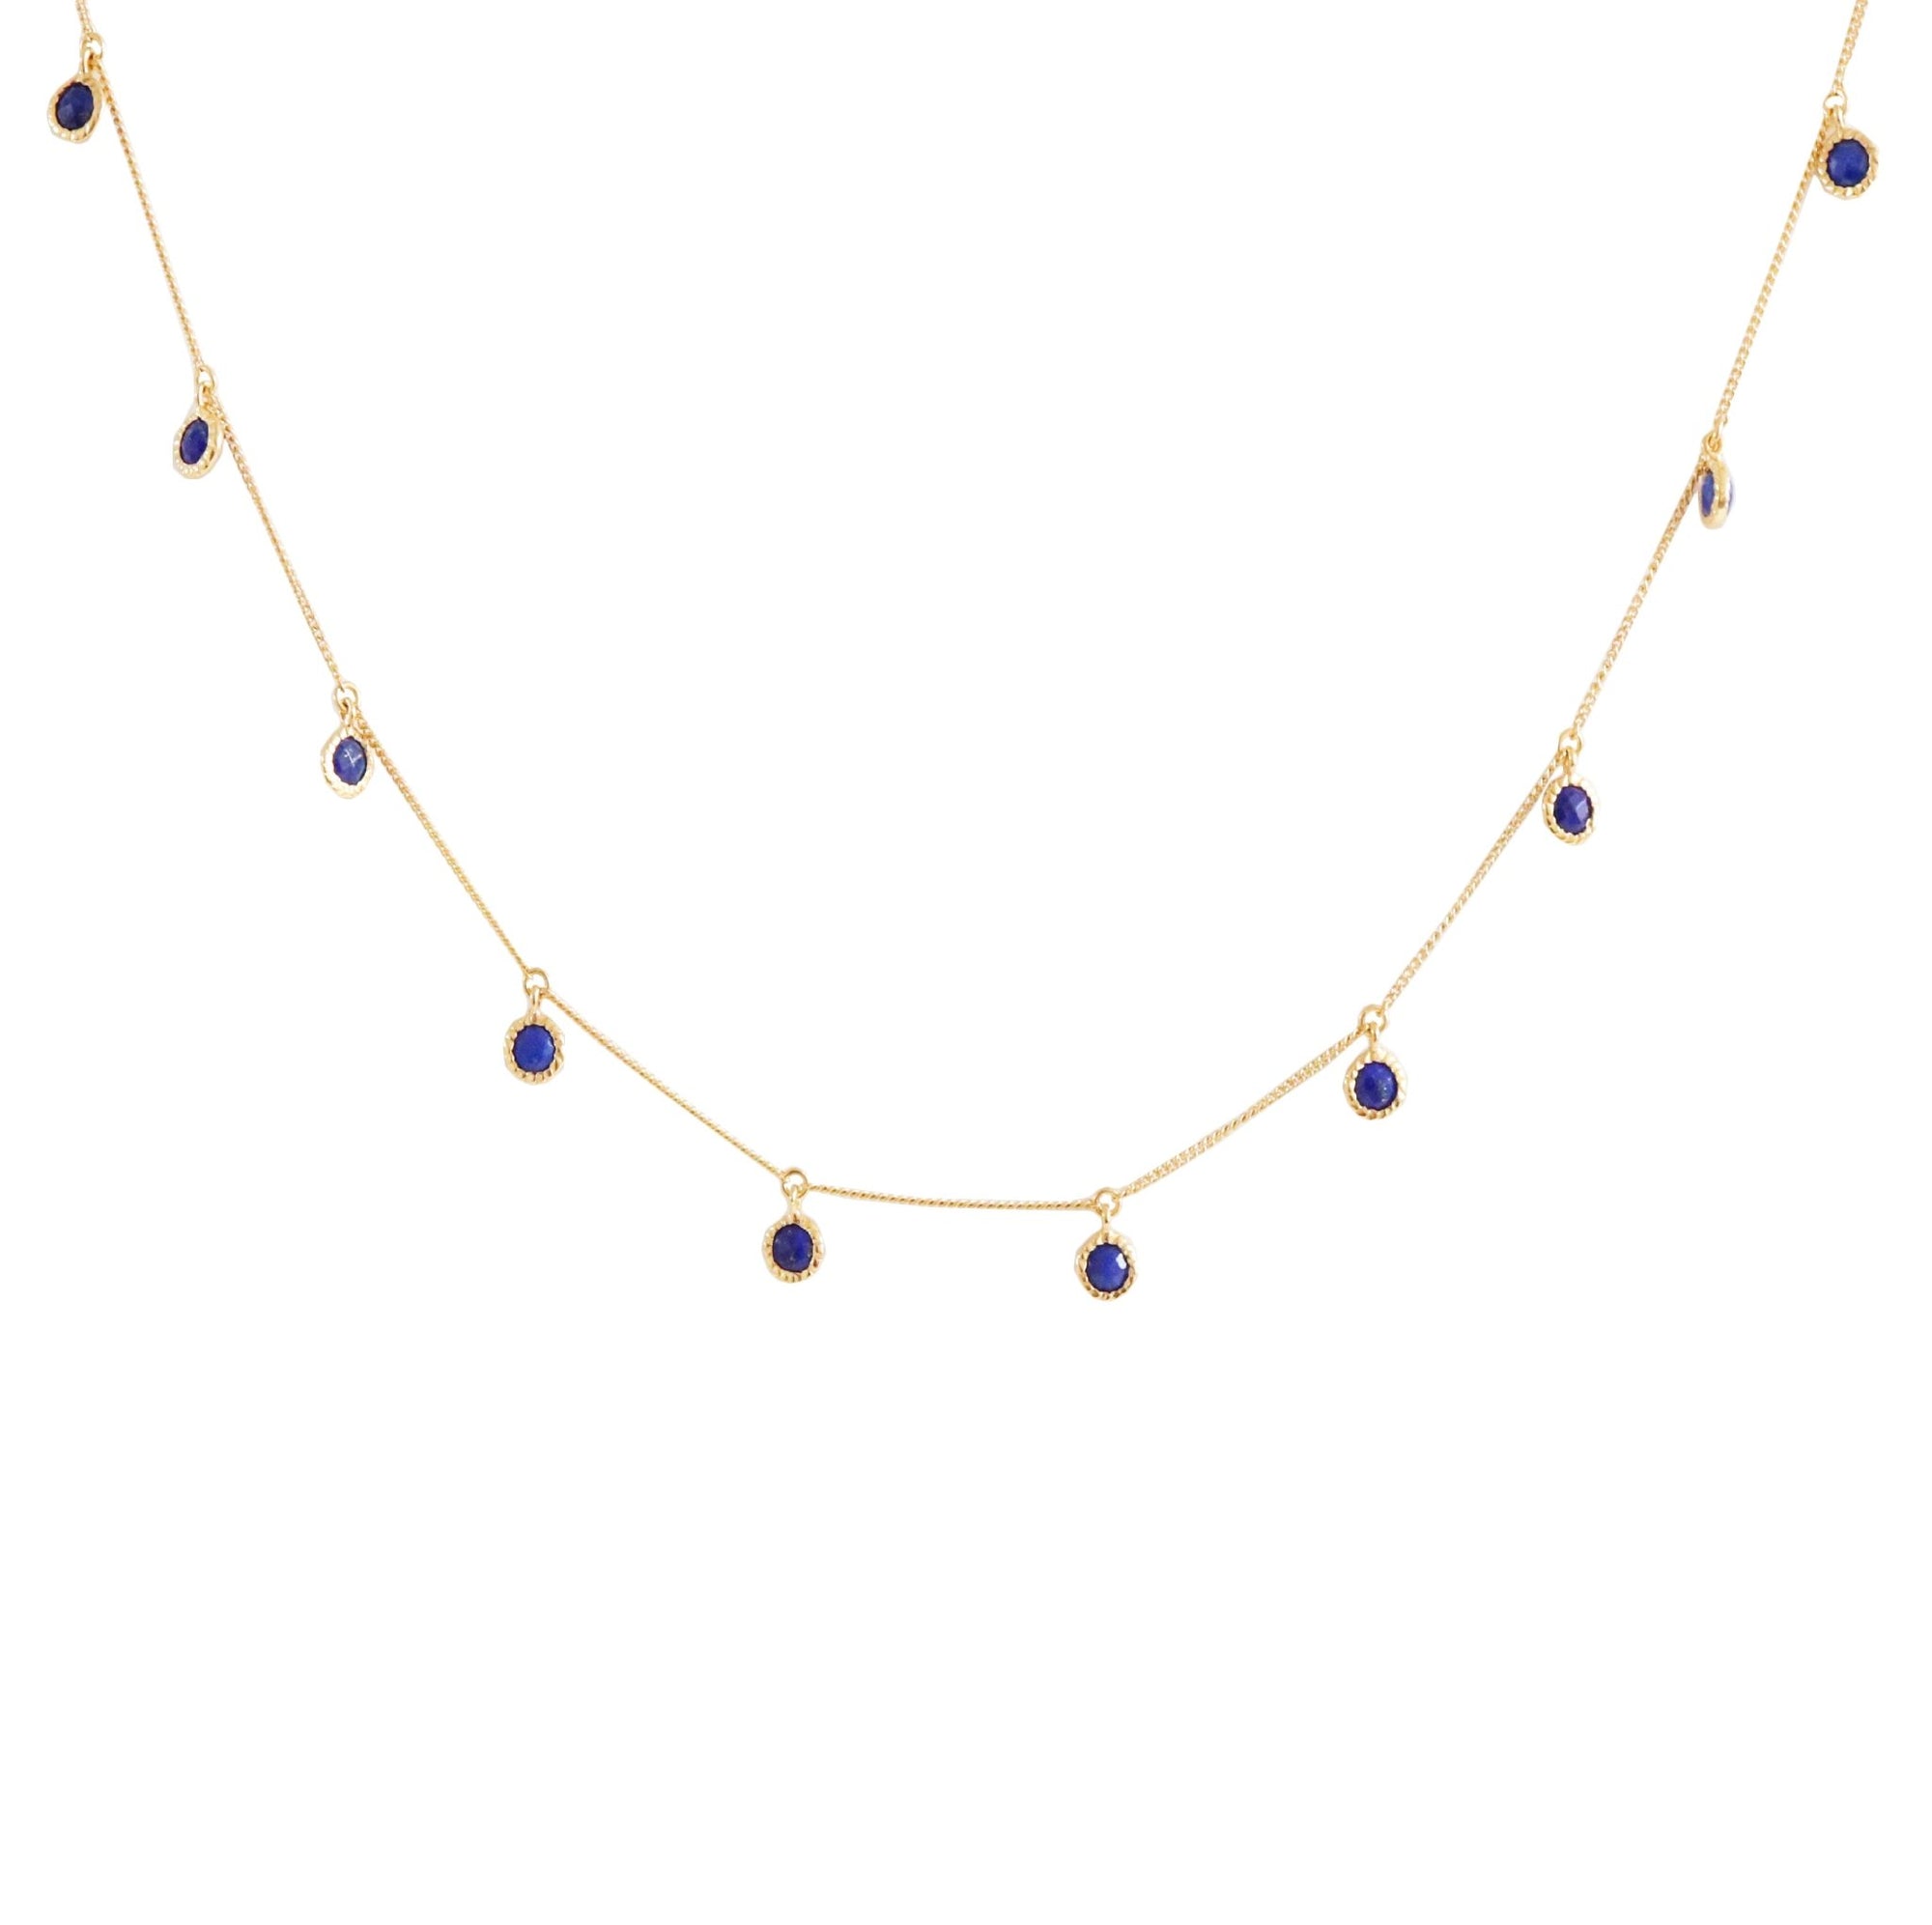 DAINTY LEGACY COLLAR NECKLACE - LAPIS & GOLD - SO PRETTY CARA COTTER